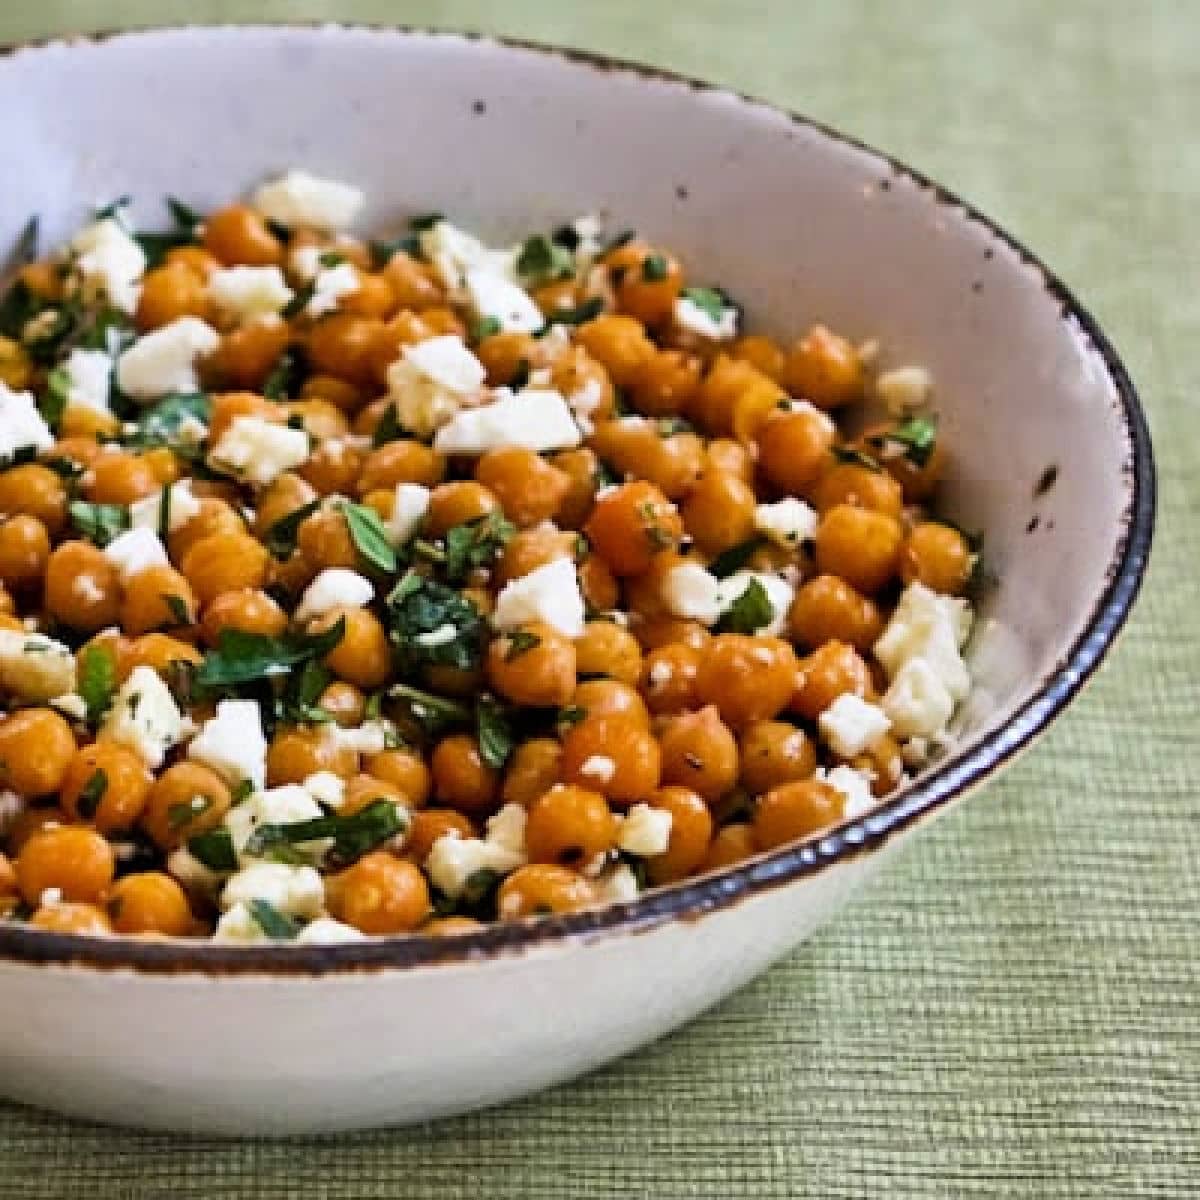 Garlic Roasted Chickpeas with Feta, Mint, and Lemon shown in serving bowl.